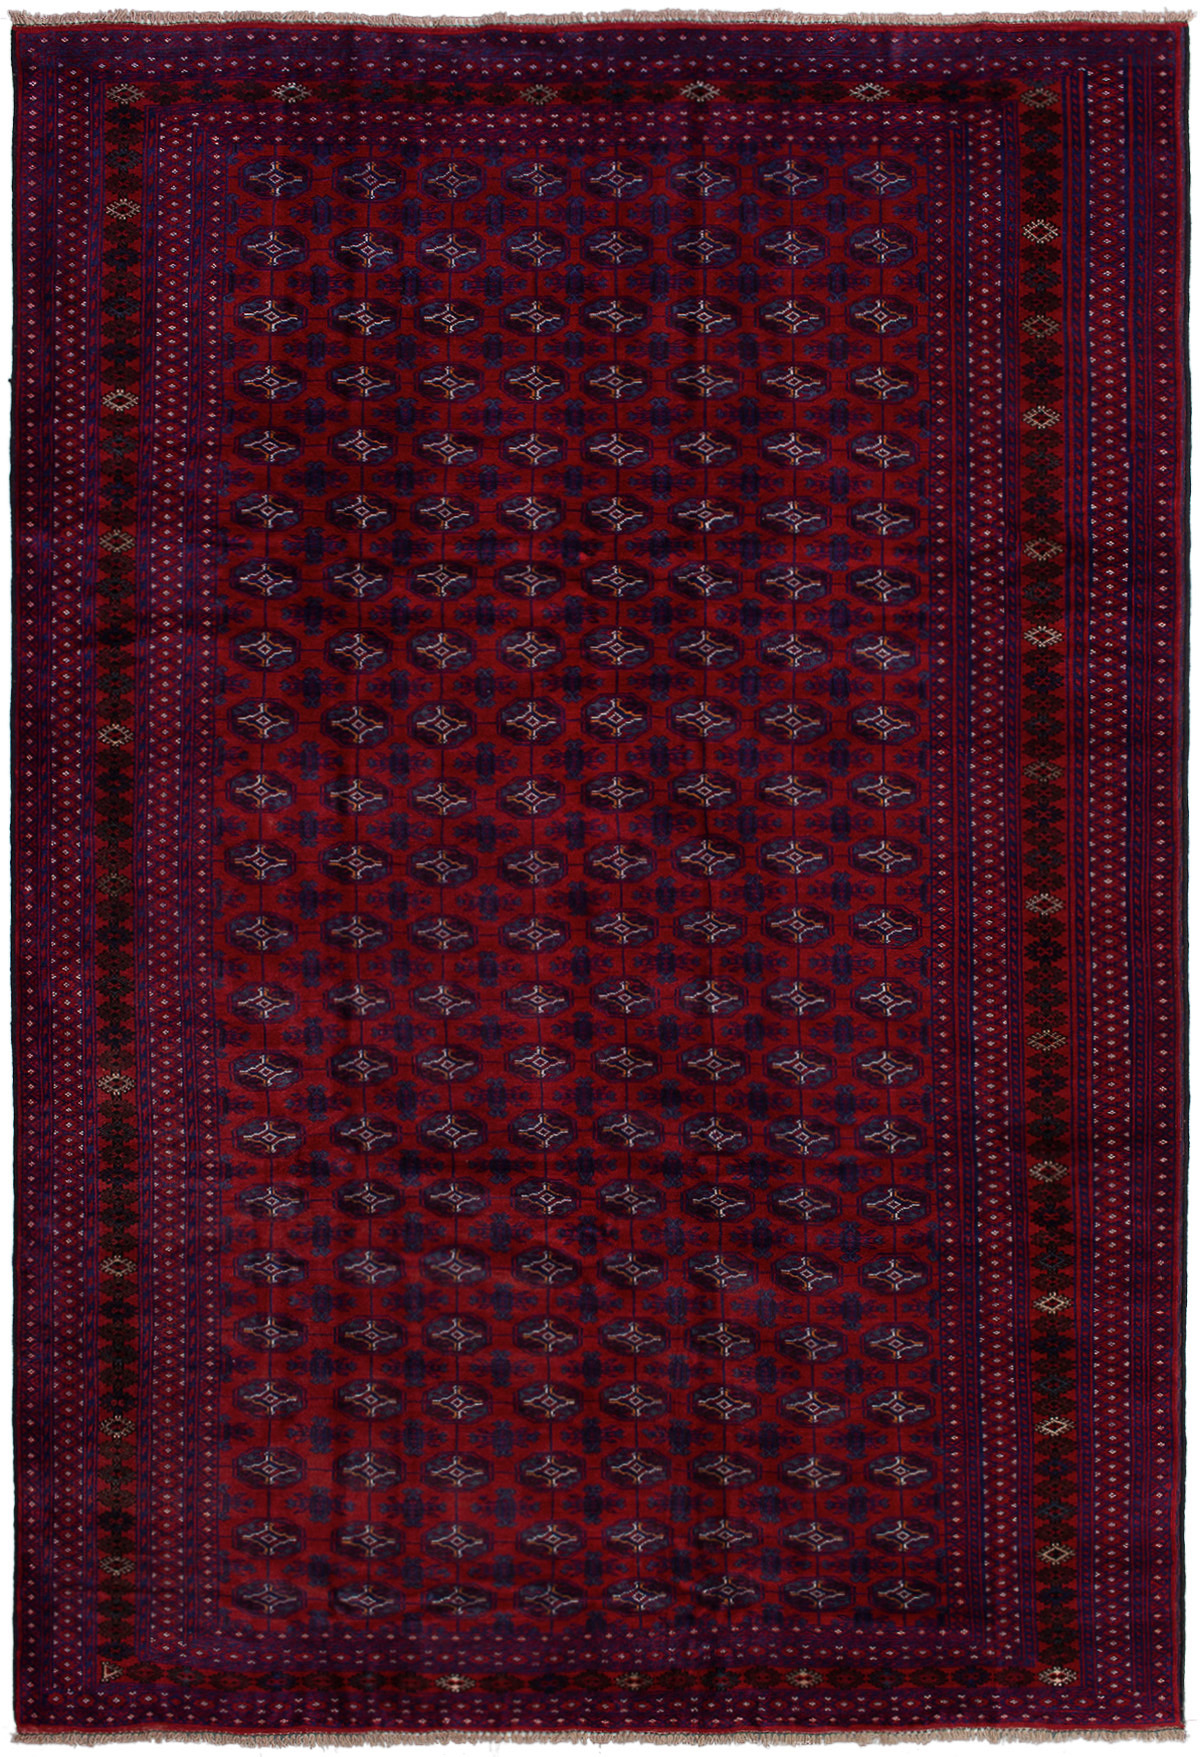 Hand-knotted Finest Rizbaft   Rug 6'10" x 9'10" Size: 6'10" x 9'10"  